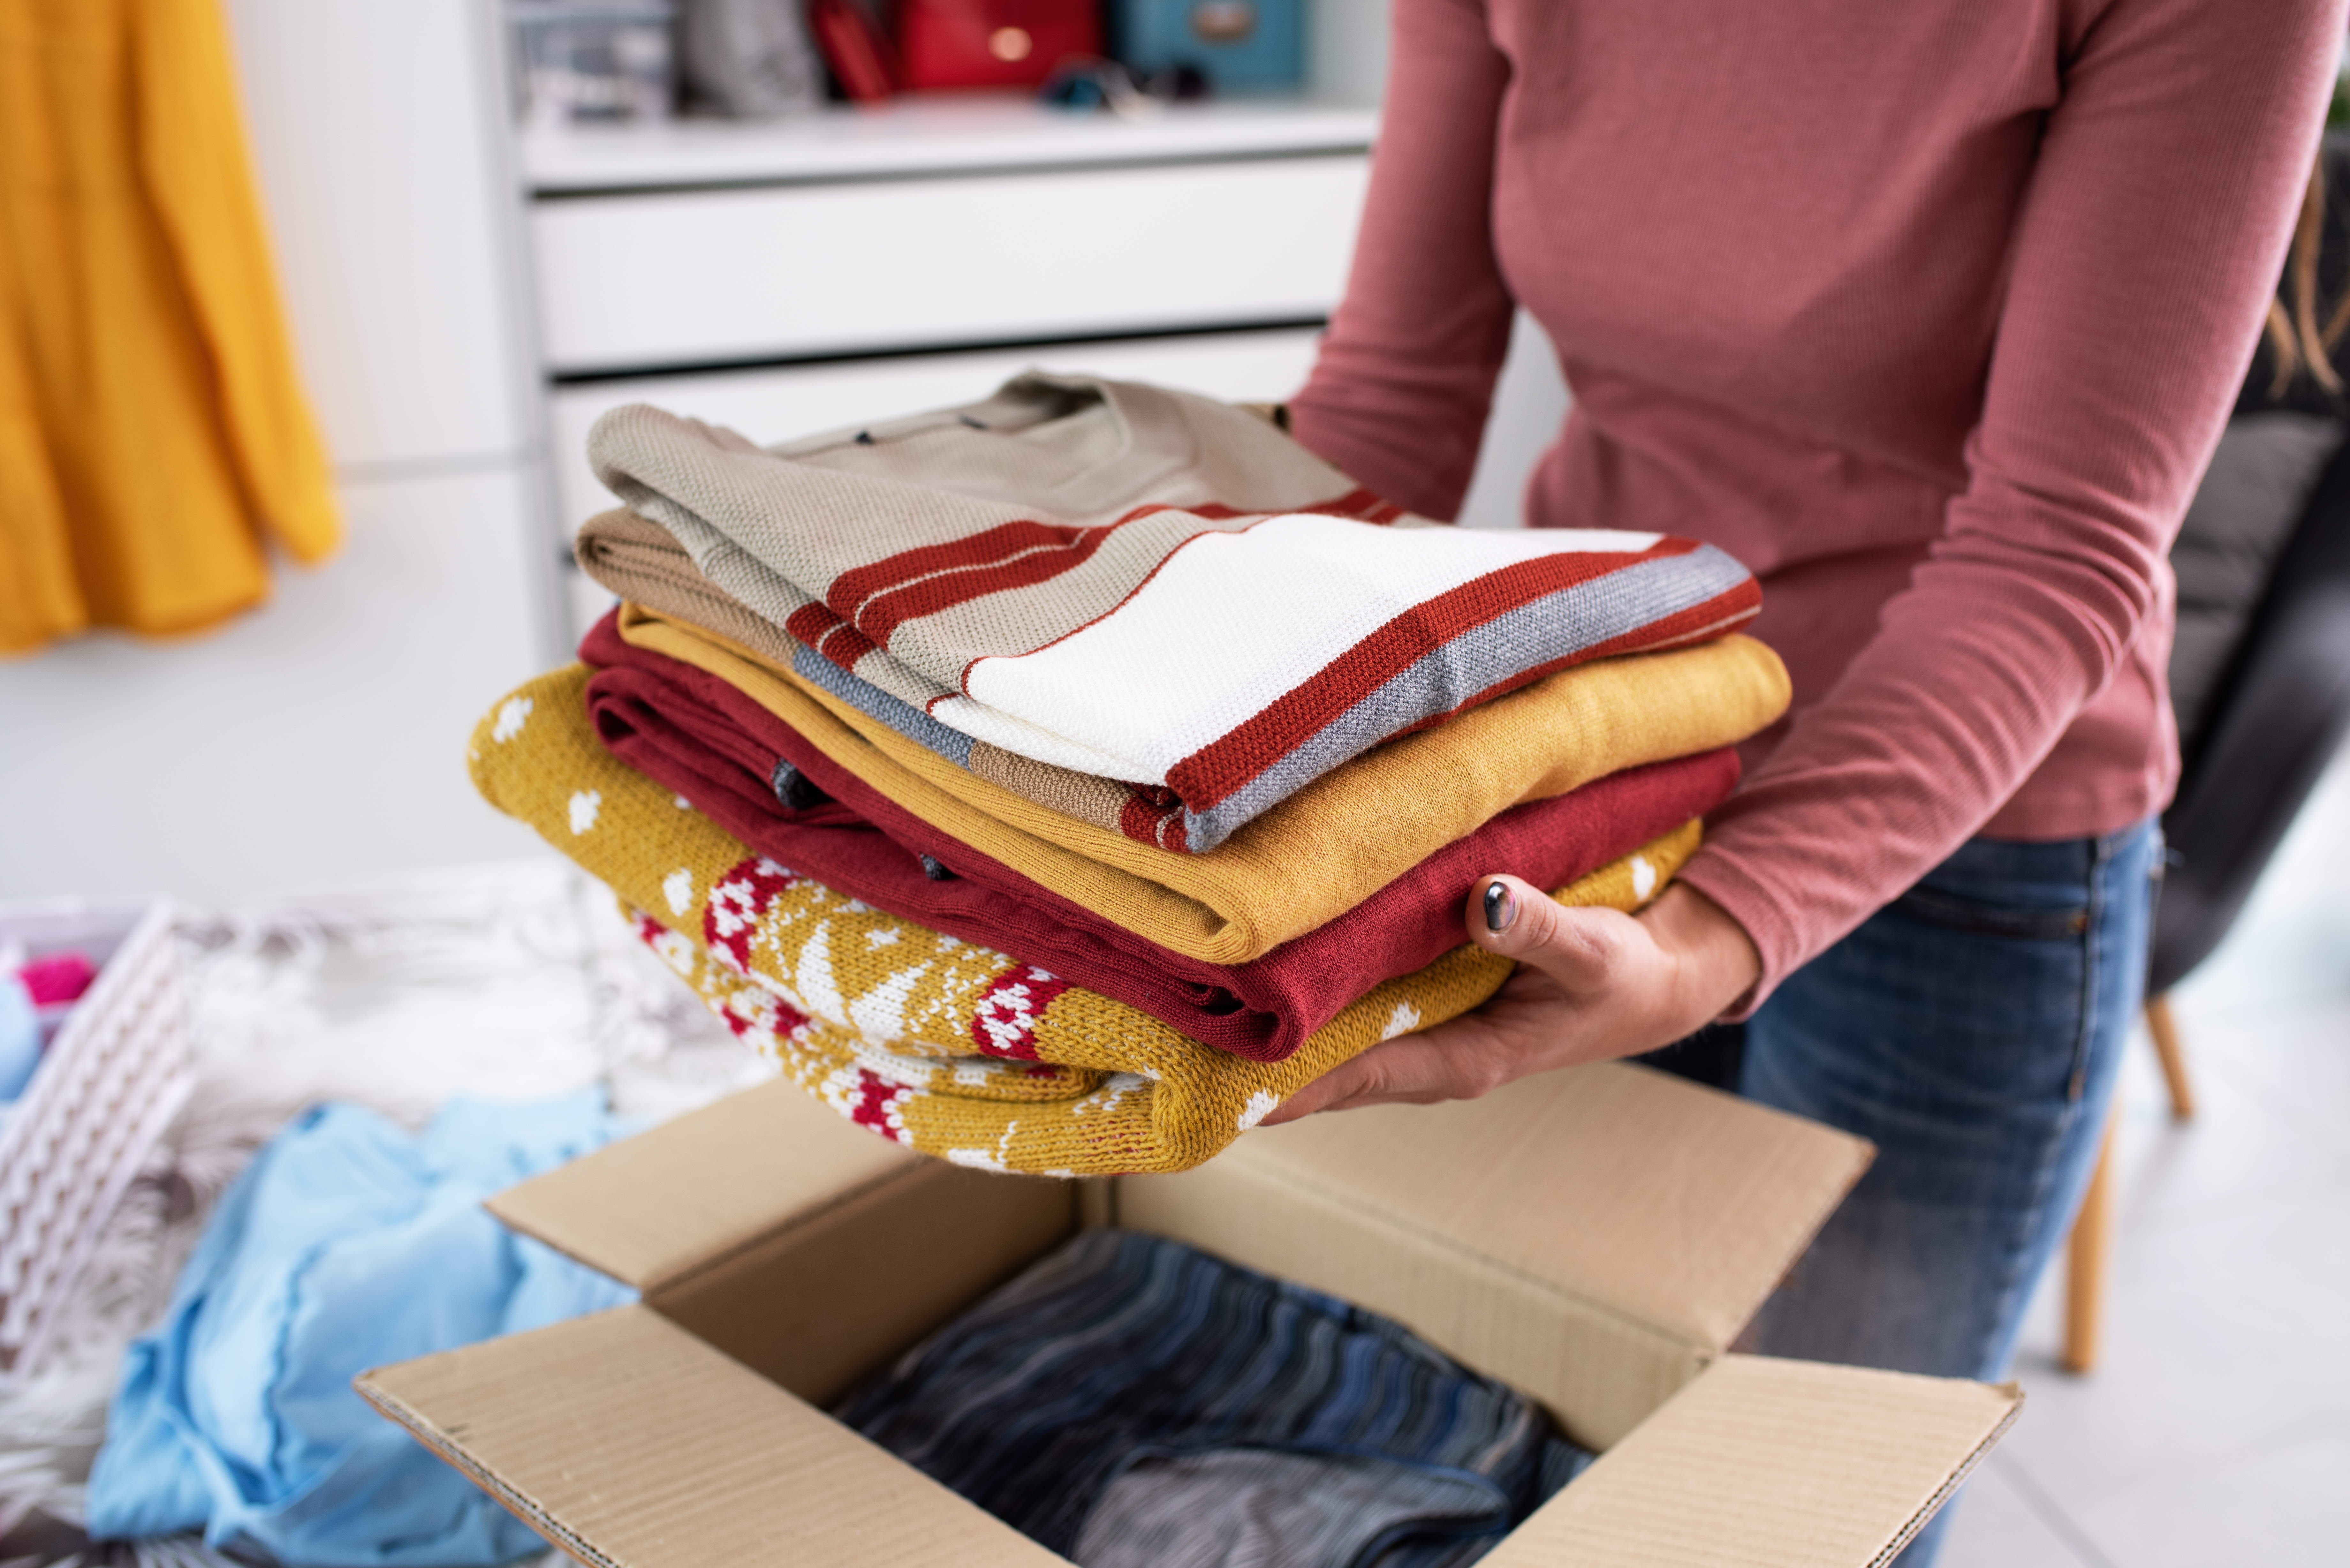 A woman packing her clothes in a box | Source: Shutterstock